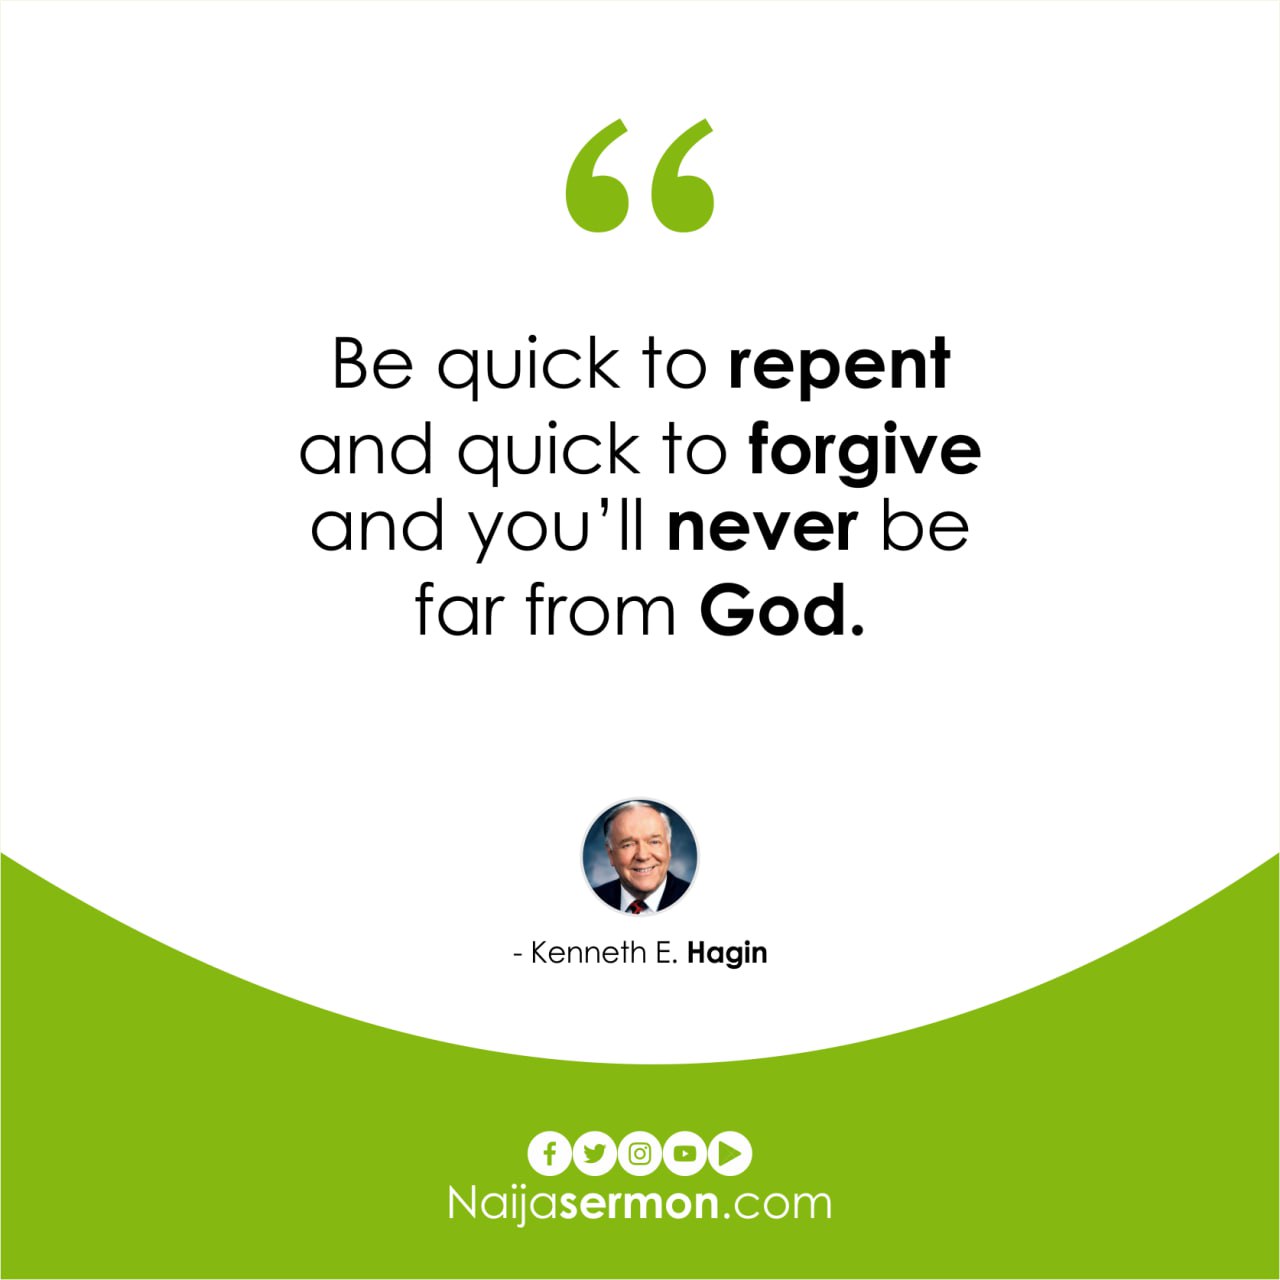 QUOTE OF THE DAY BY KENNETH E. HAGIN 13